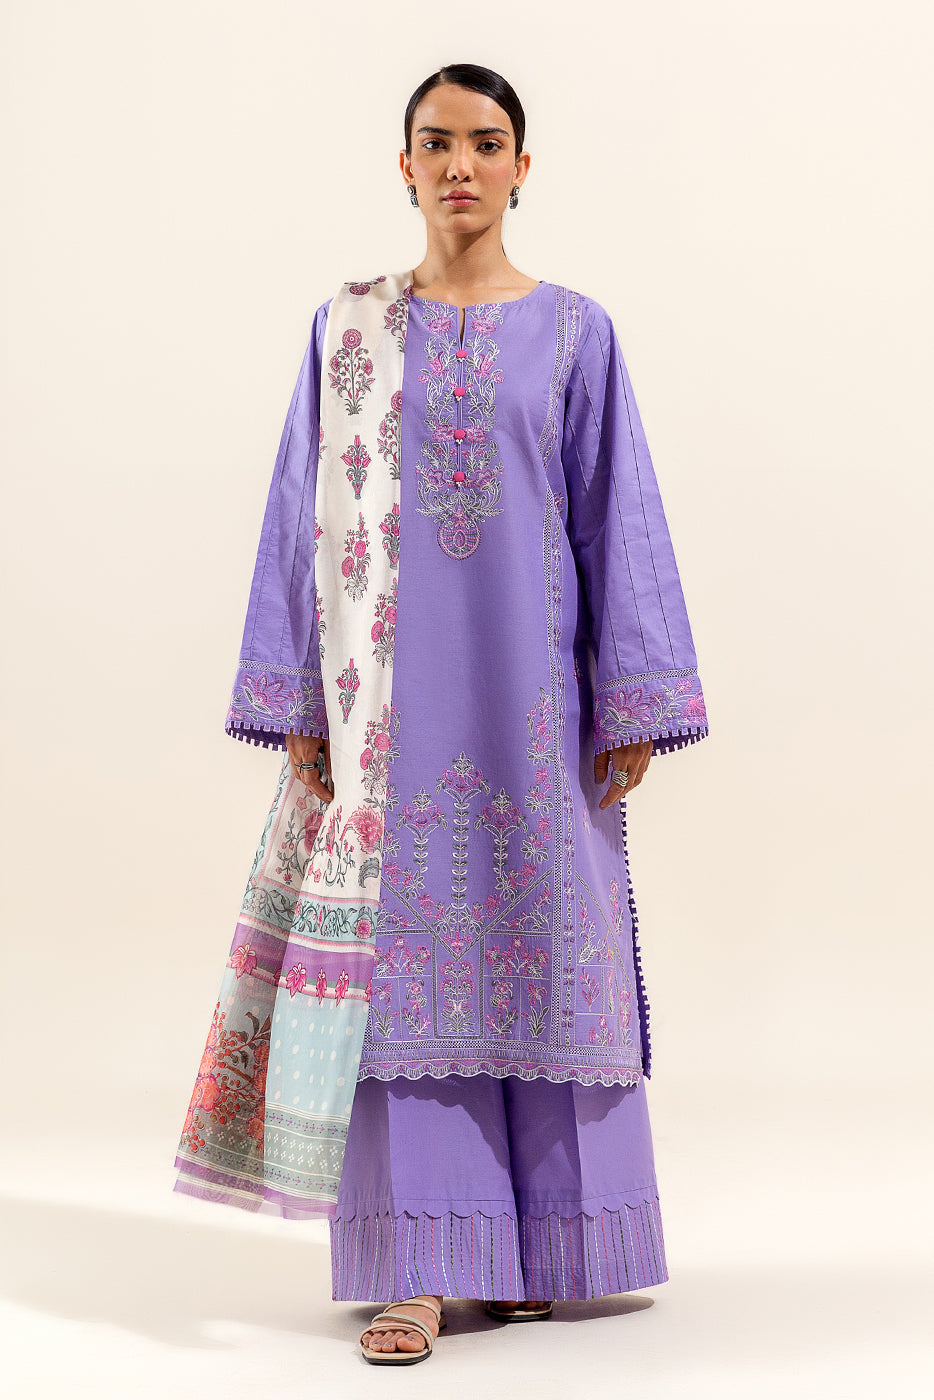 3 PIECE EMBROIDERED LAWN SUIT-ROSEATE MUSE (UNSTITCHED)